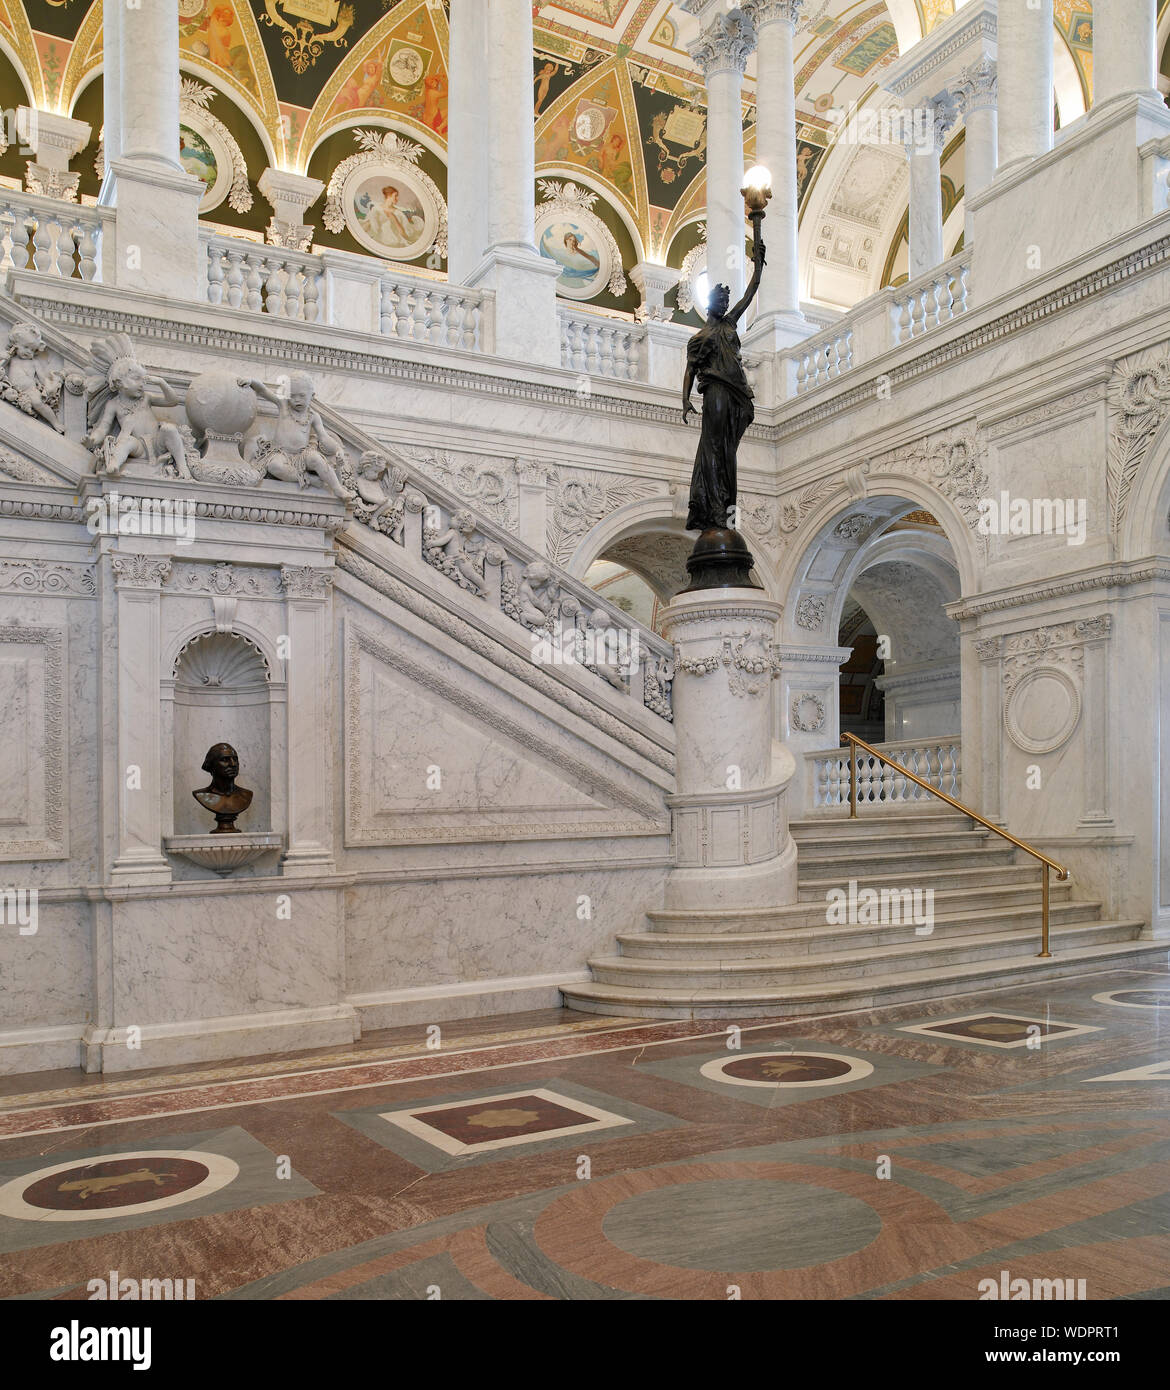 Great Hall. View of grand staircase and bronze statue of female figure on newel post holding a torch of electric light. Library of Congress Thomas Jefferson Building, Washington, D.C. Stock Photo